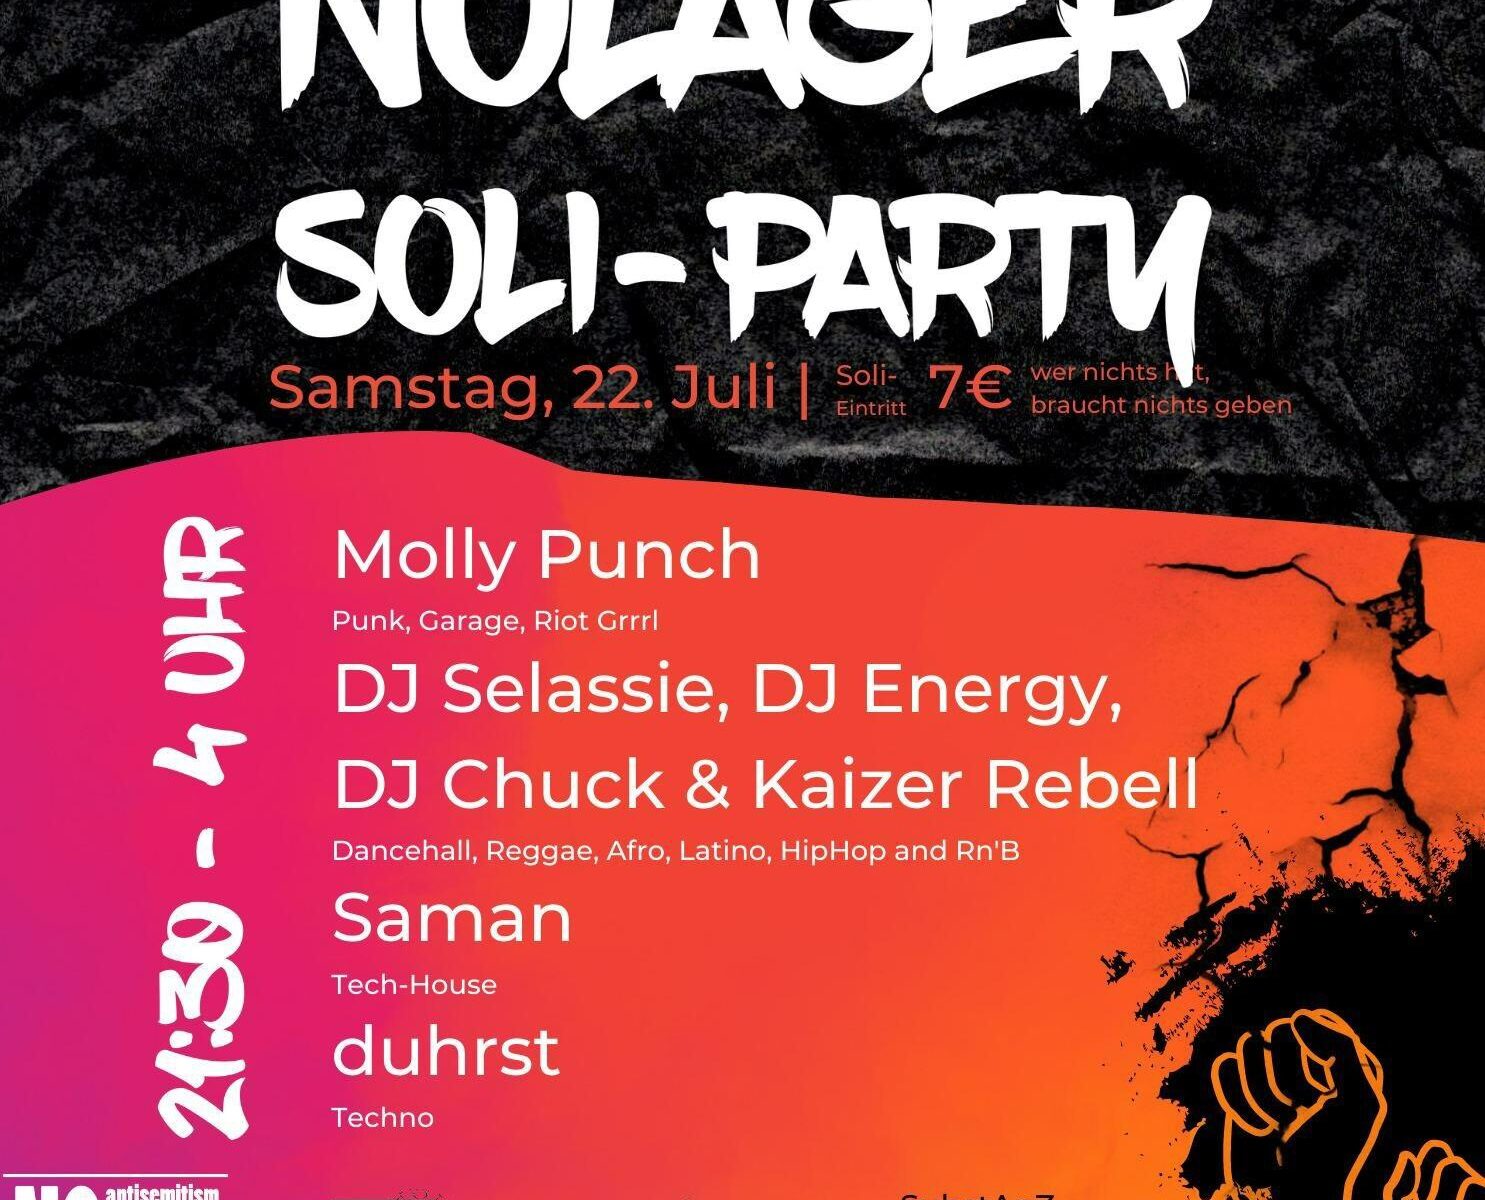 NoLager Soli-Party Molly Punch make Punk, Garage, Riot Grrrl and coming from Cologne, Germany. After that some DJs: DJ Selassie, DJ Energy, DJ Chuck, Kaizer Rebell doing Dancehall, Reggae, HipHop DJ Saman and duhrst doing Techno Start 9:30 pm Entry 7 Euro If you don't have enough money, it won't matter